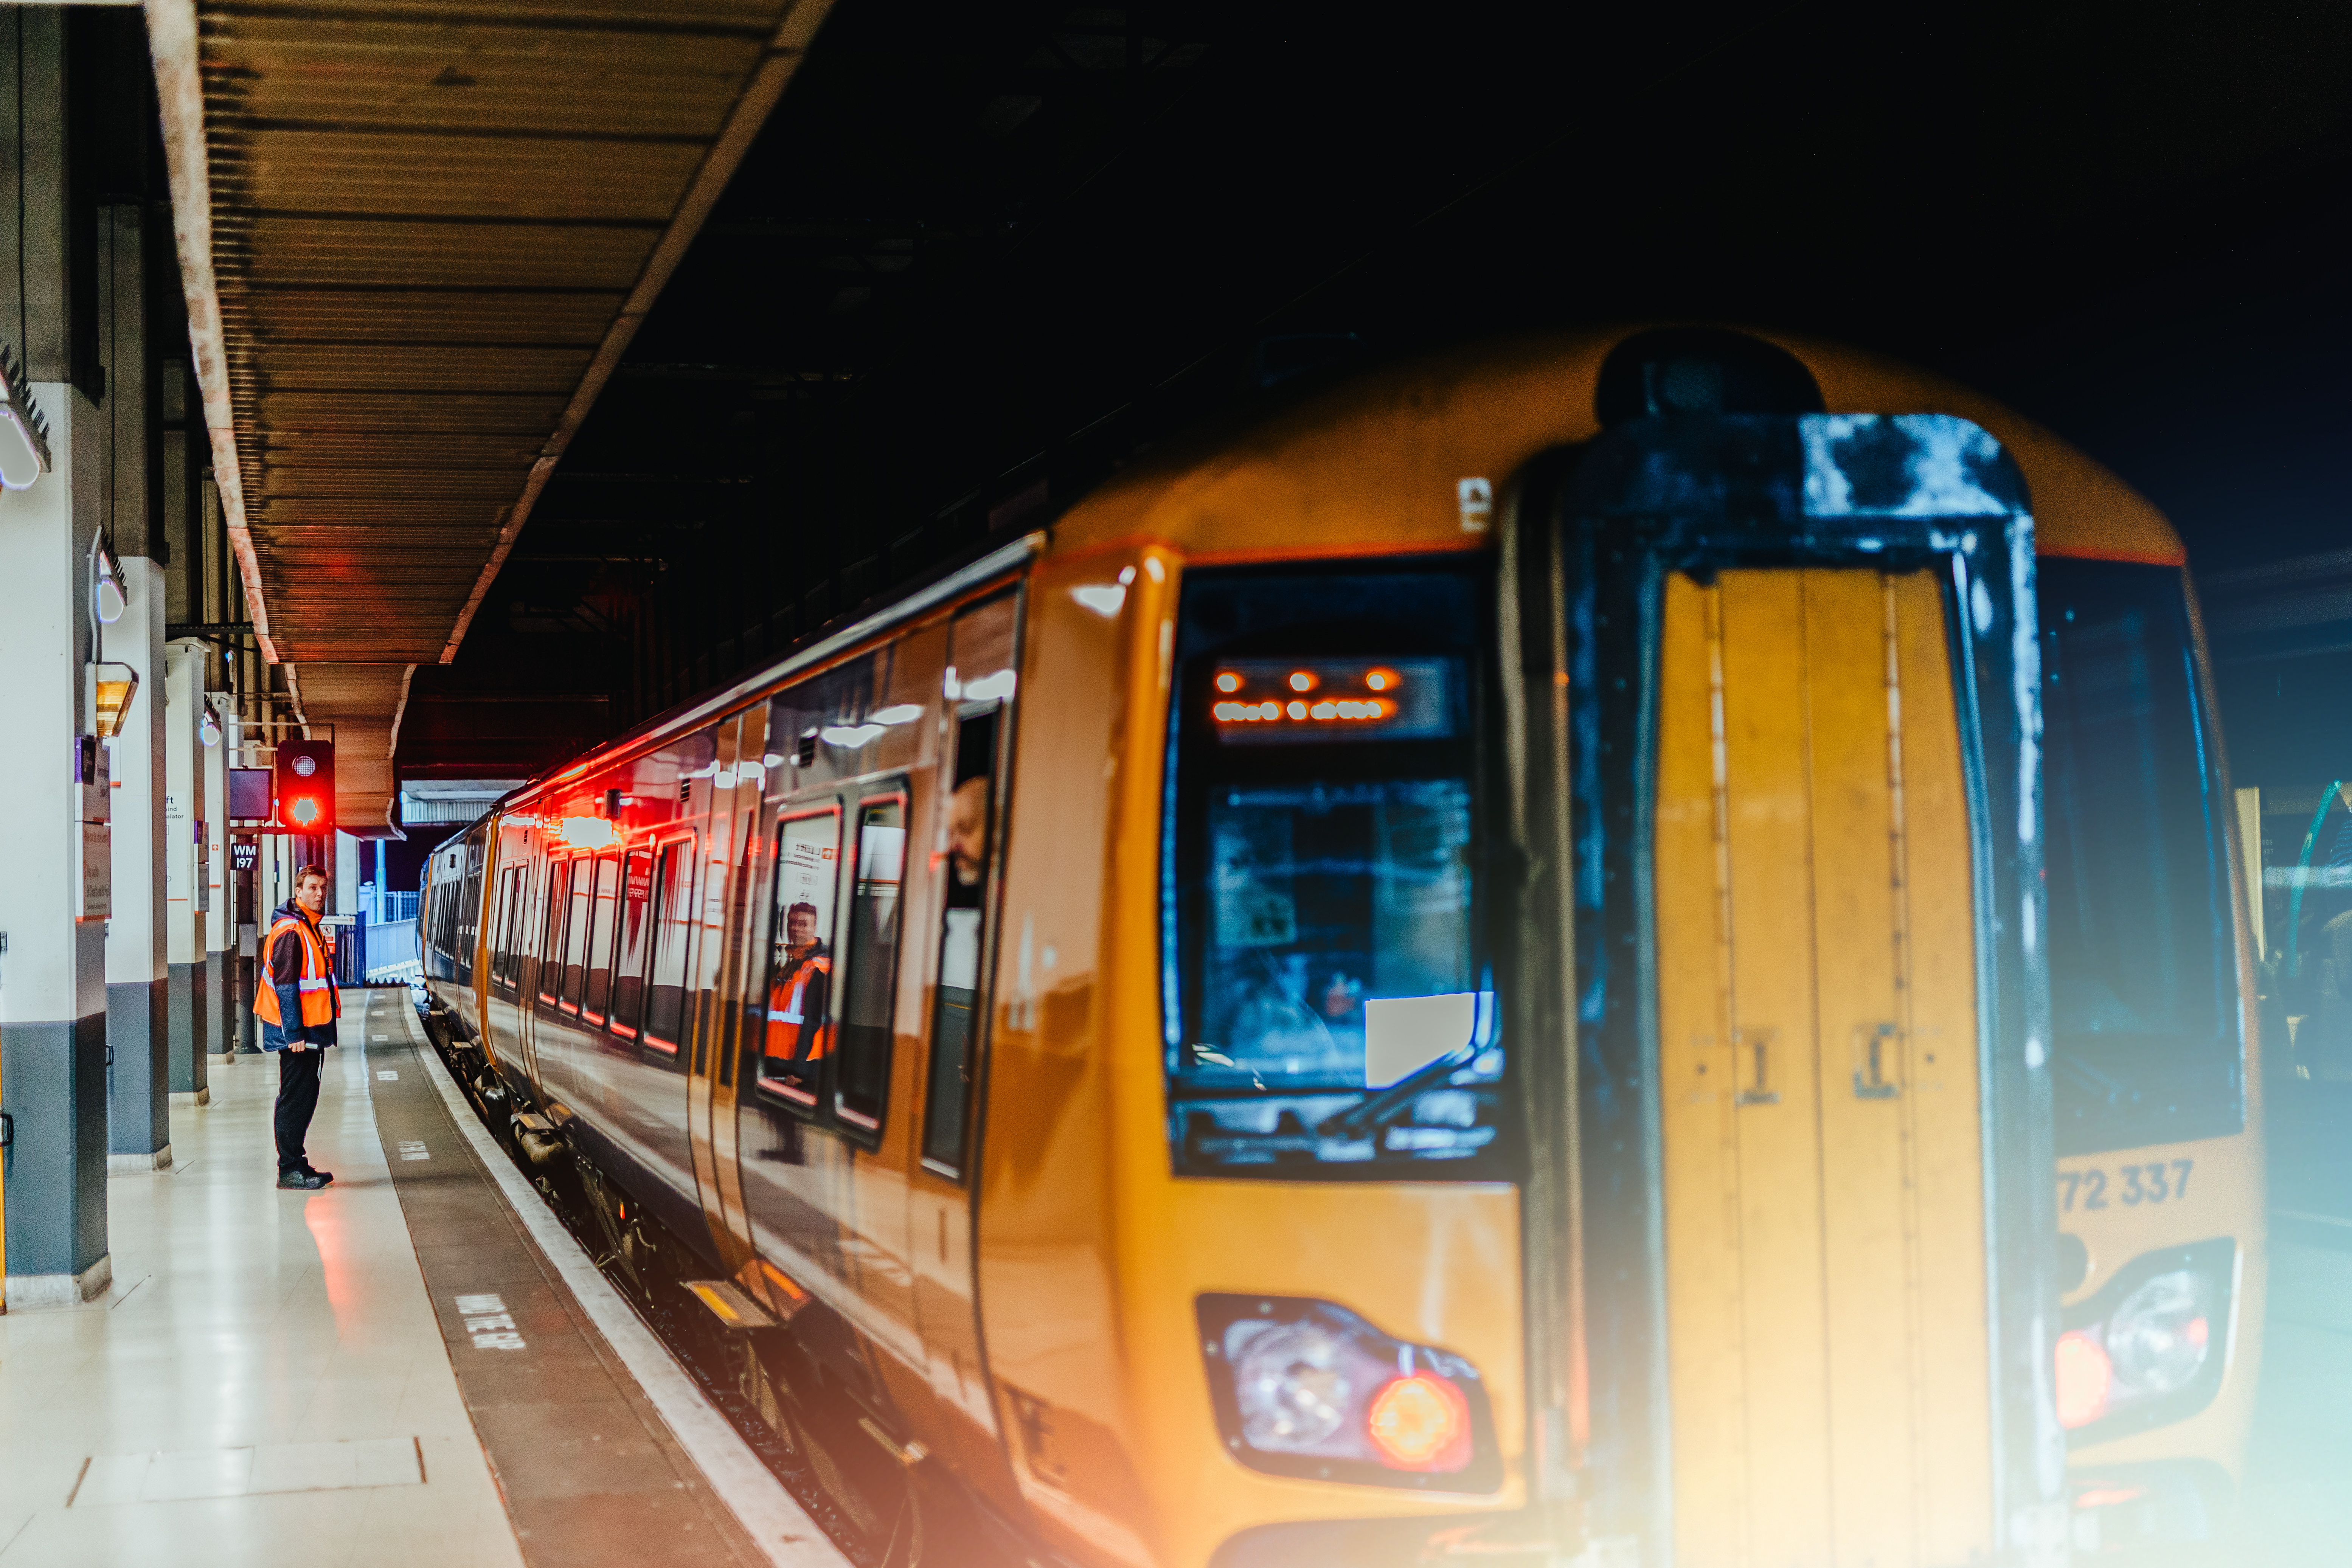 Making the case for the Midlands Rail Hub